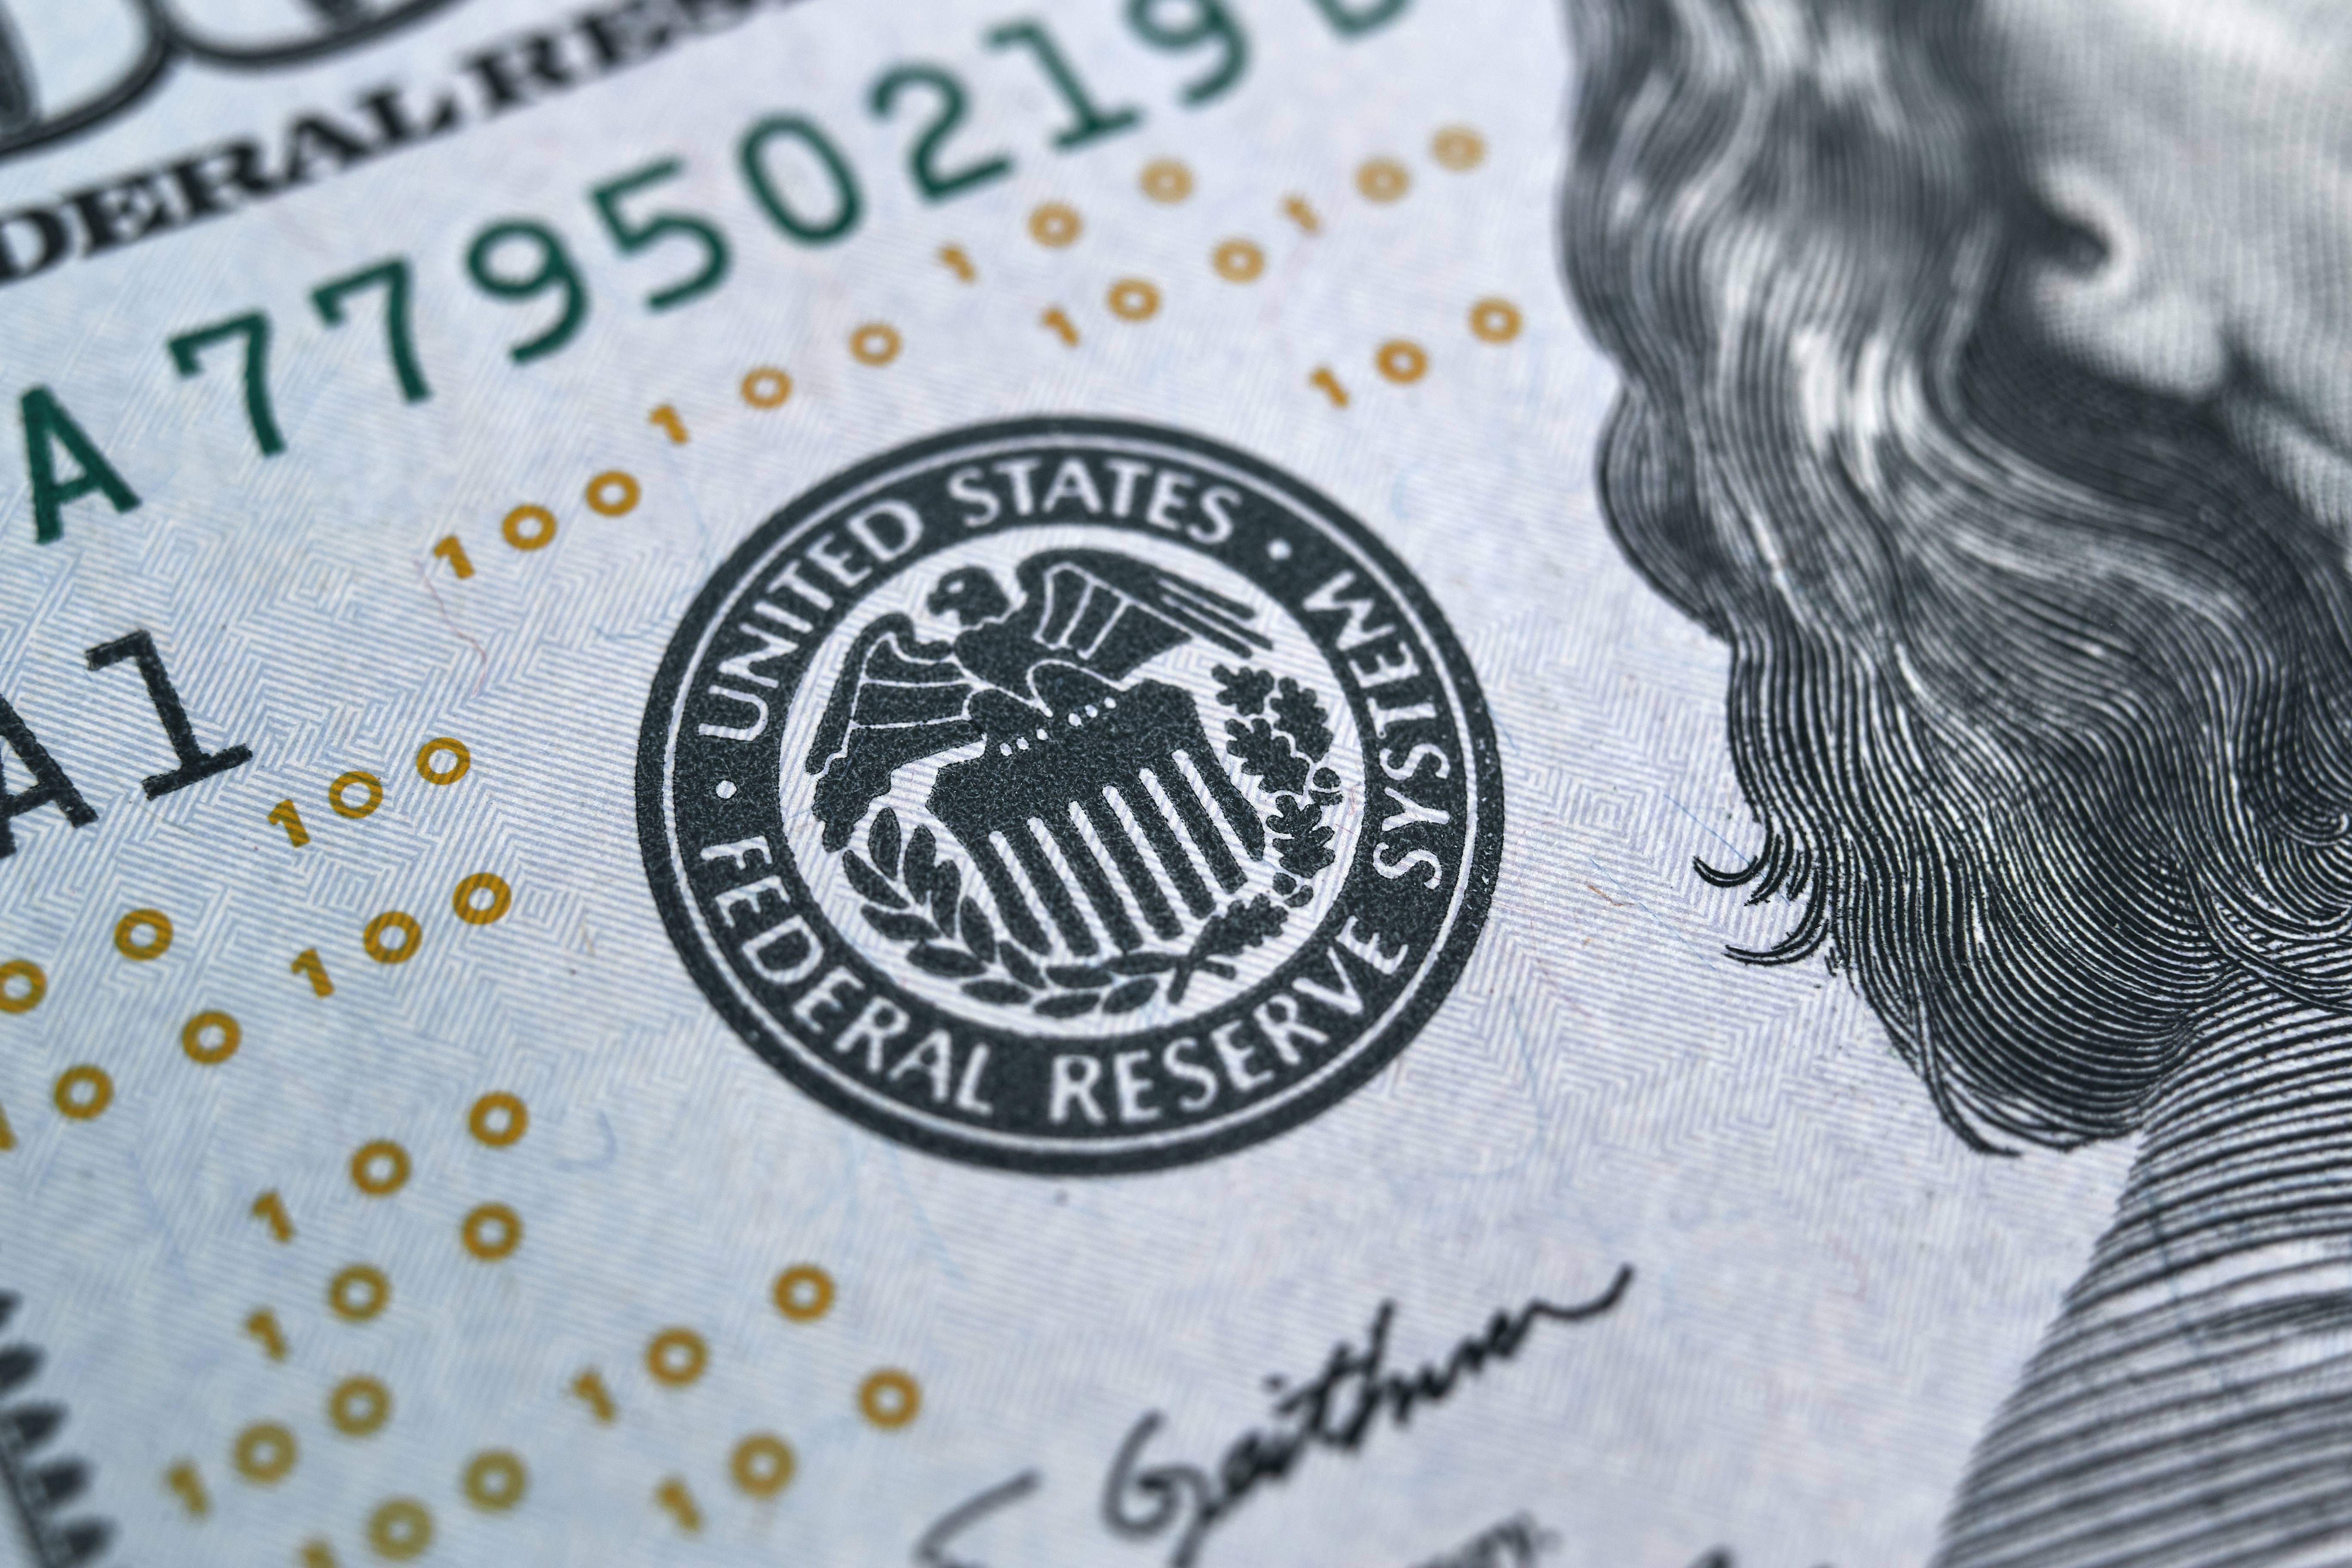 A close up of the federal reserve seal on a $ 1 0 bill.